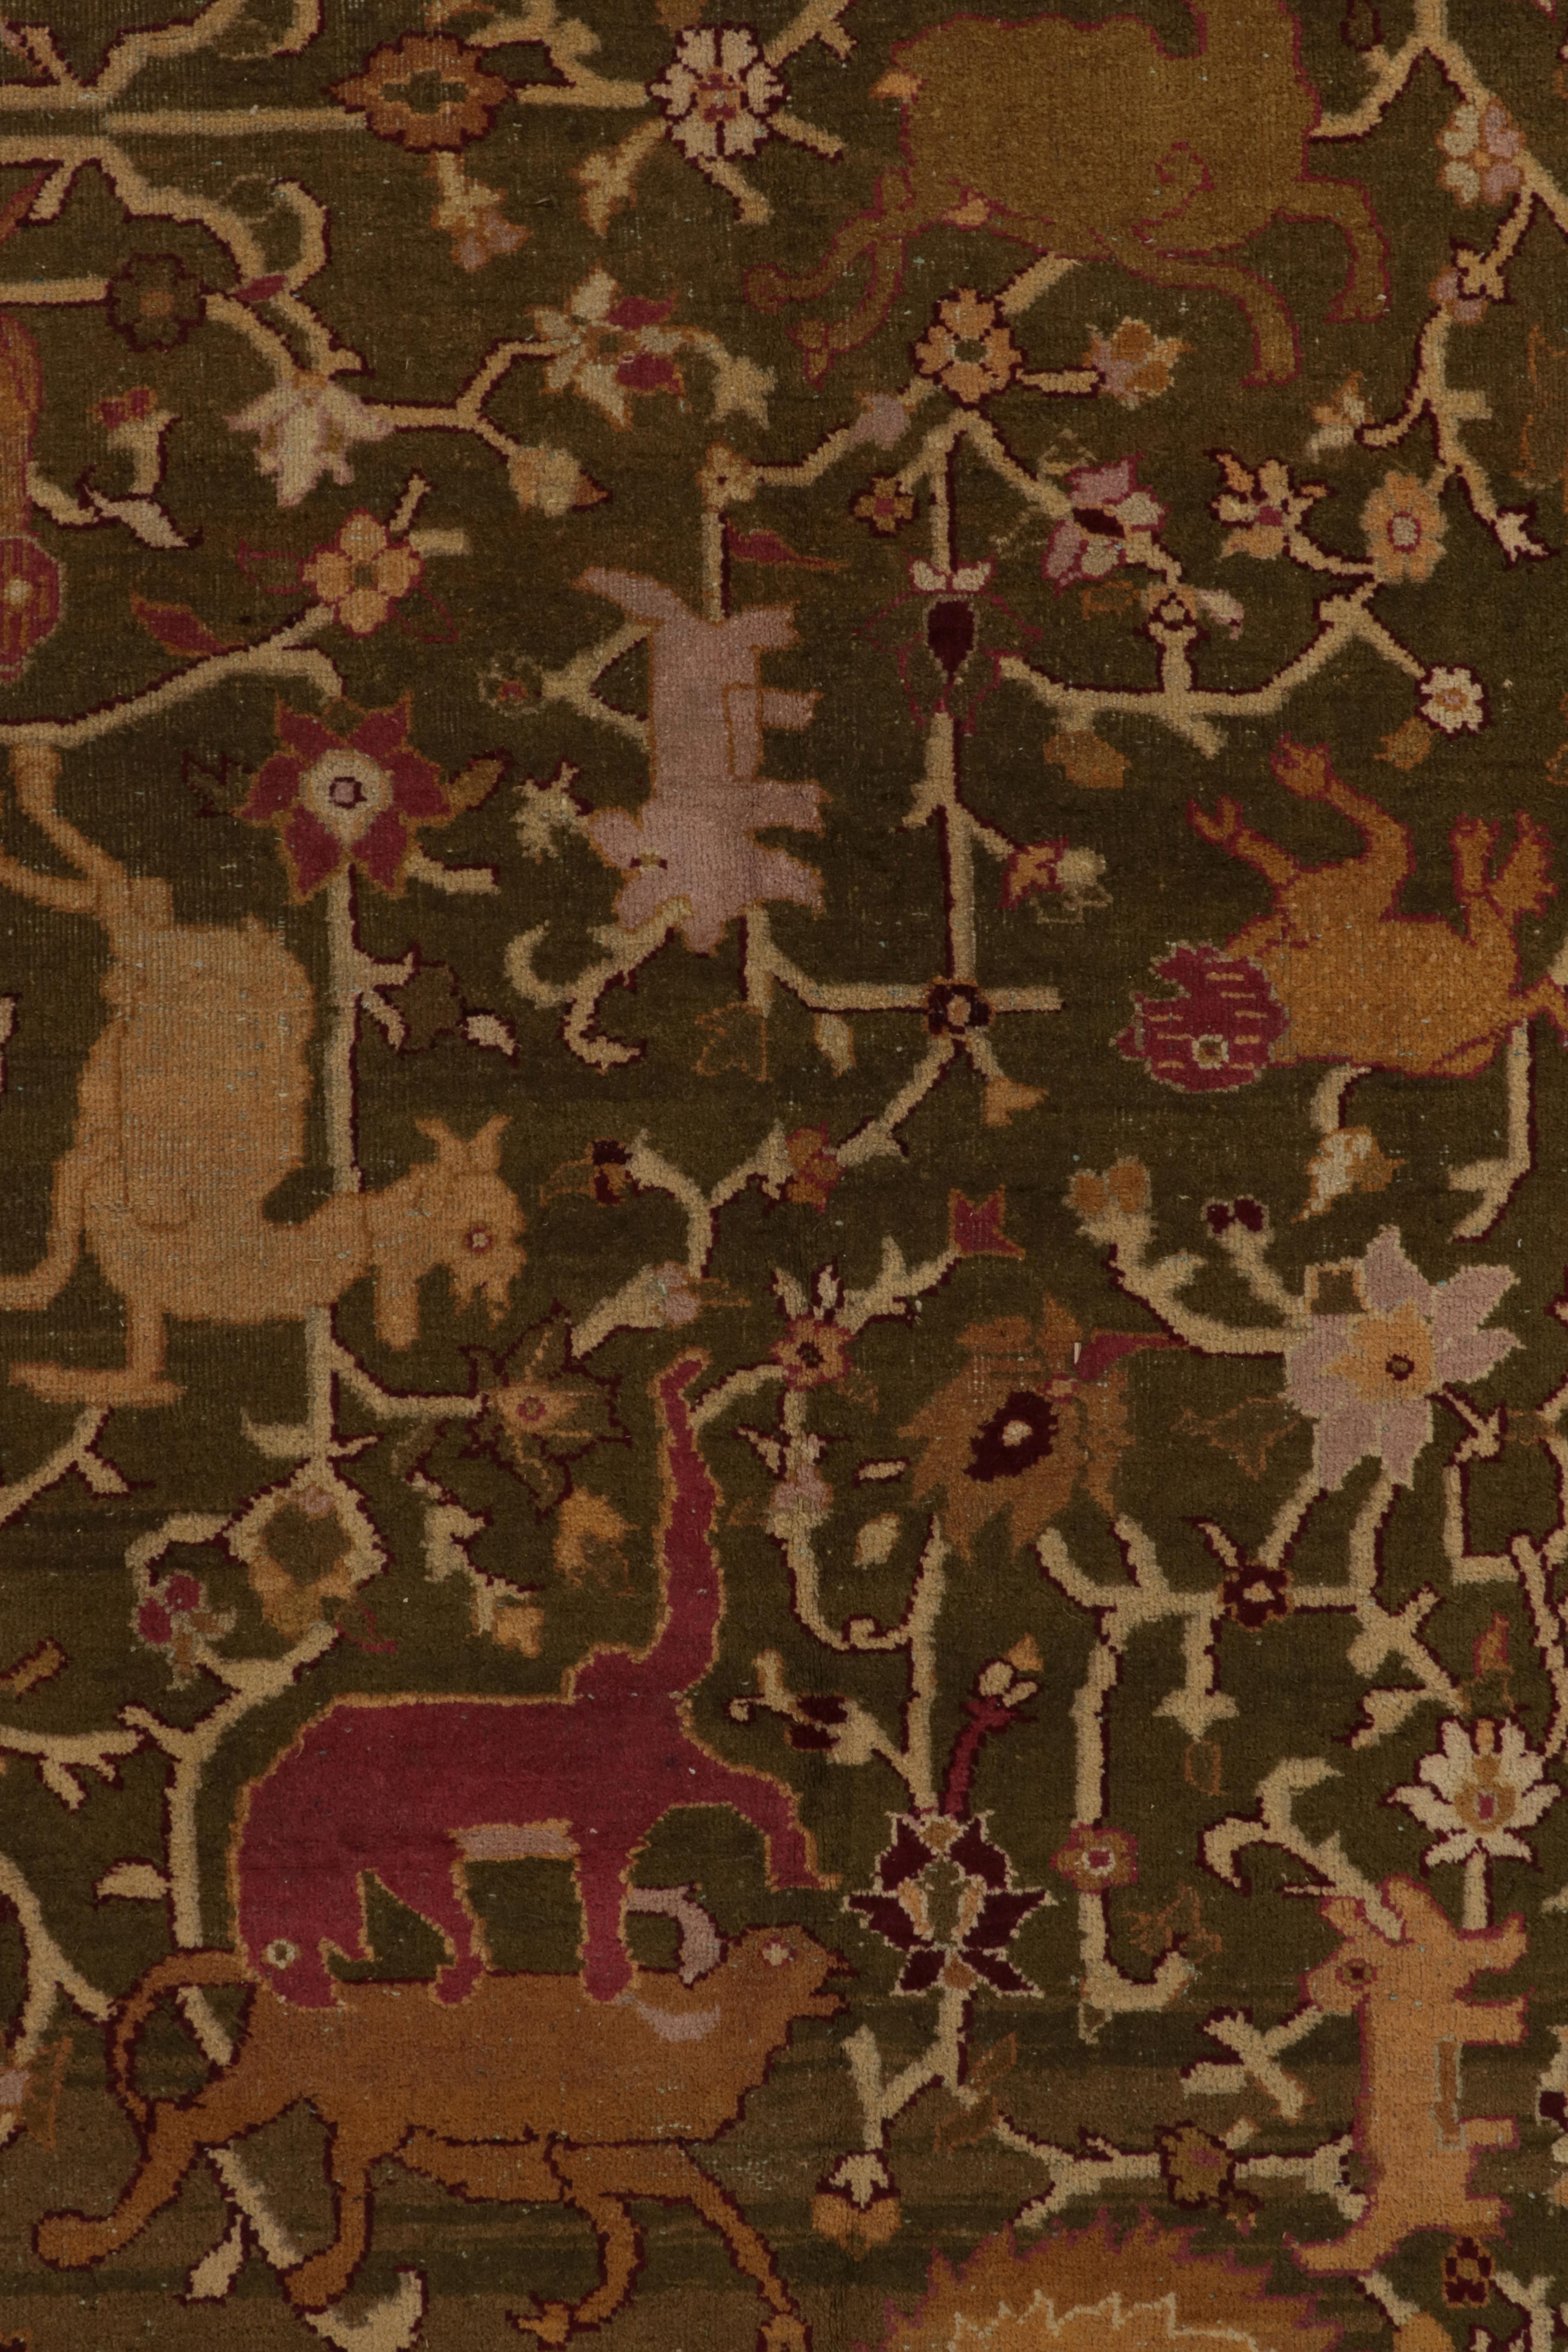 Late 19th Century Antique Amritsar rug in Greenish-Brown, Pink Gold with Pictorial  For Sale